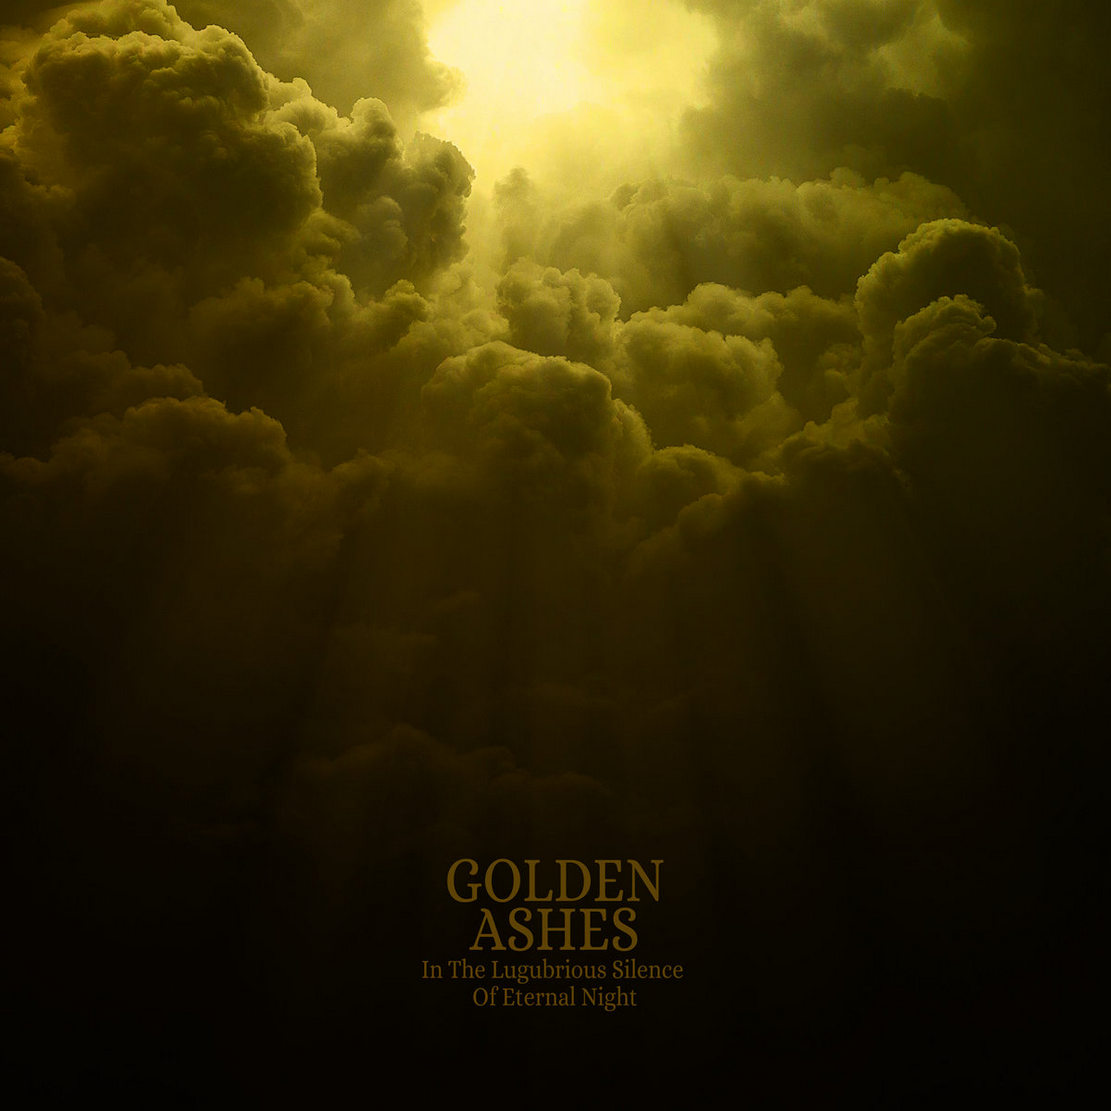 golden ashes – in the lugubrious silence of eternal night